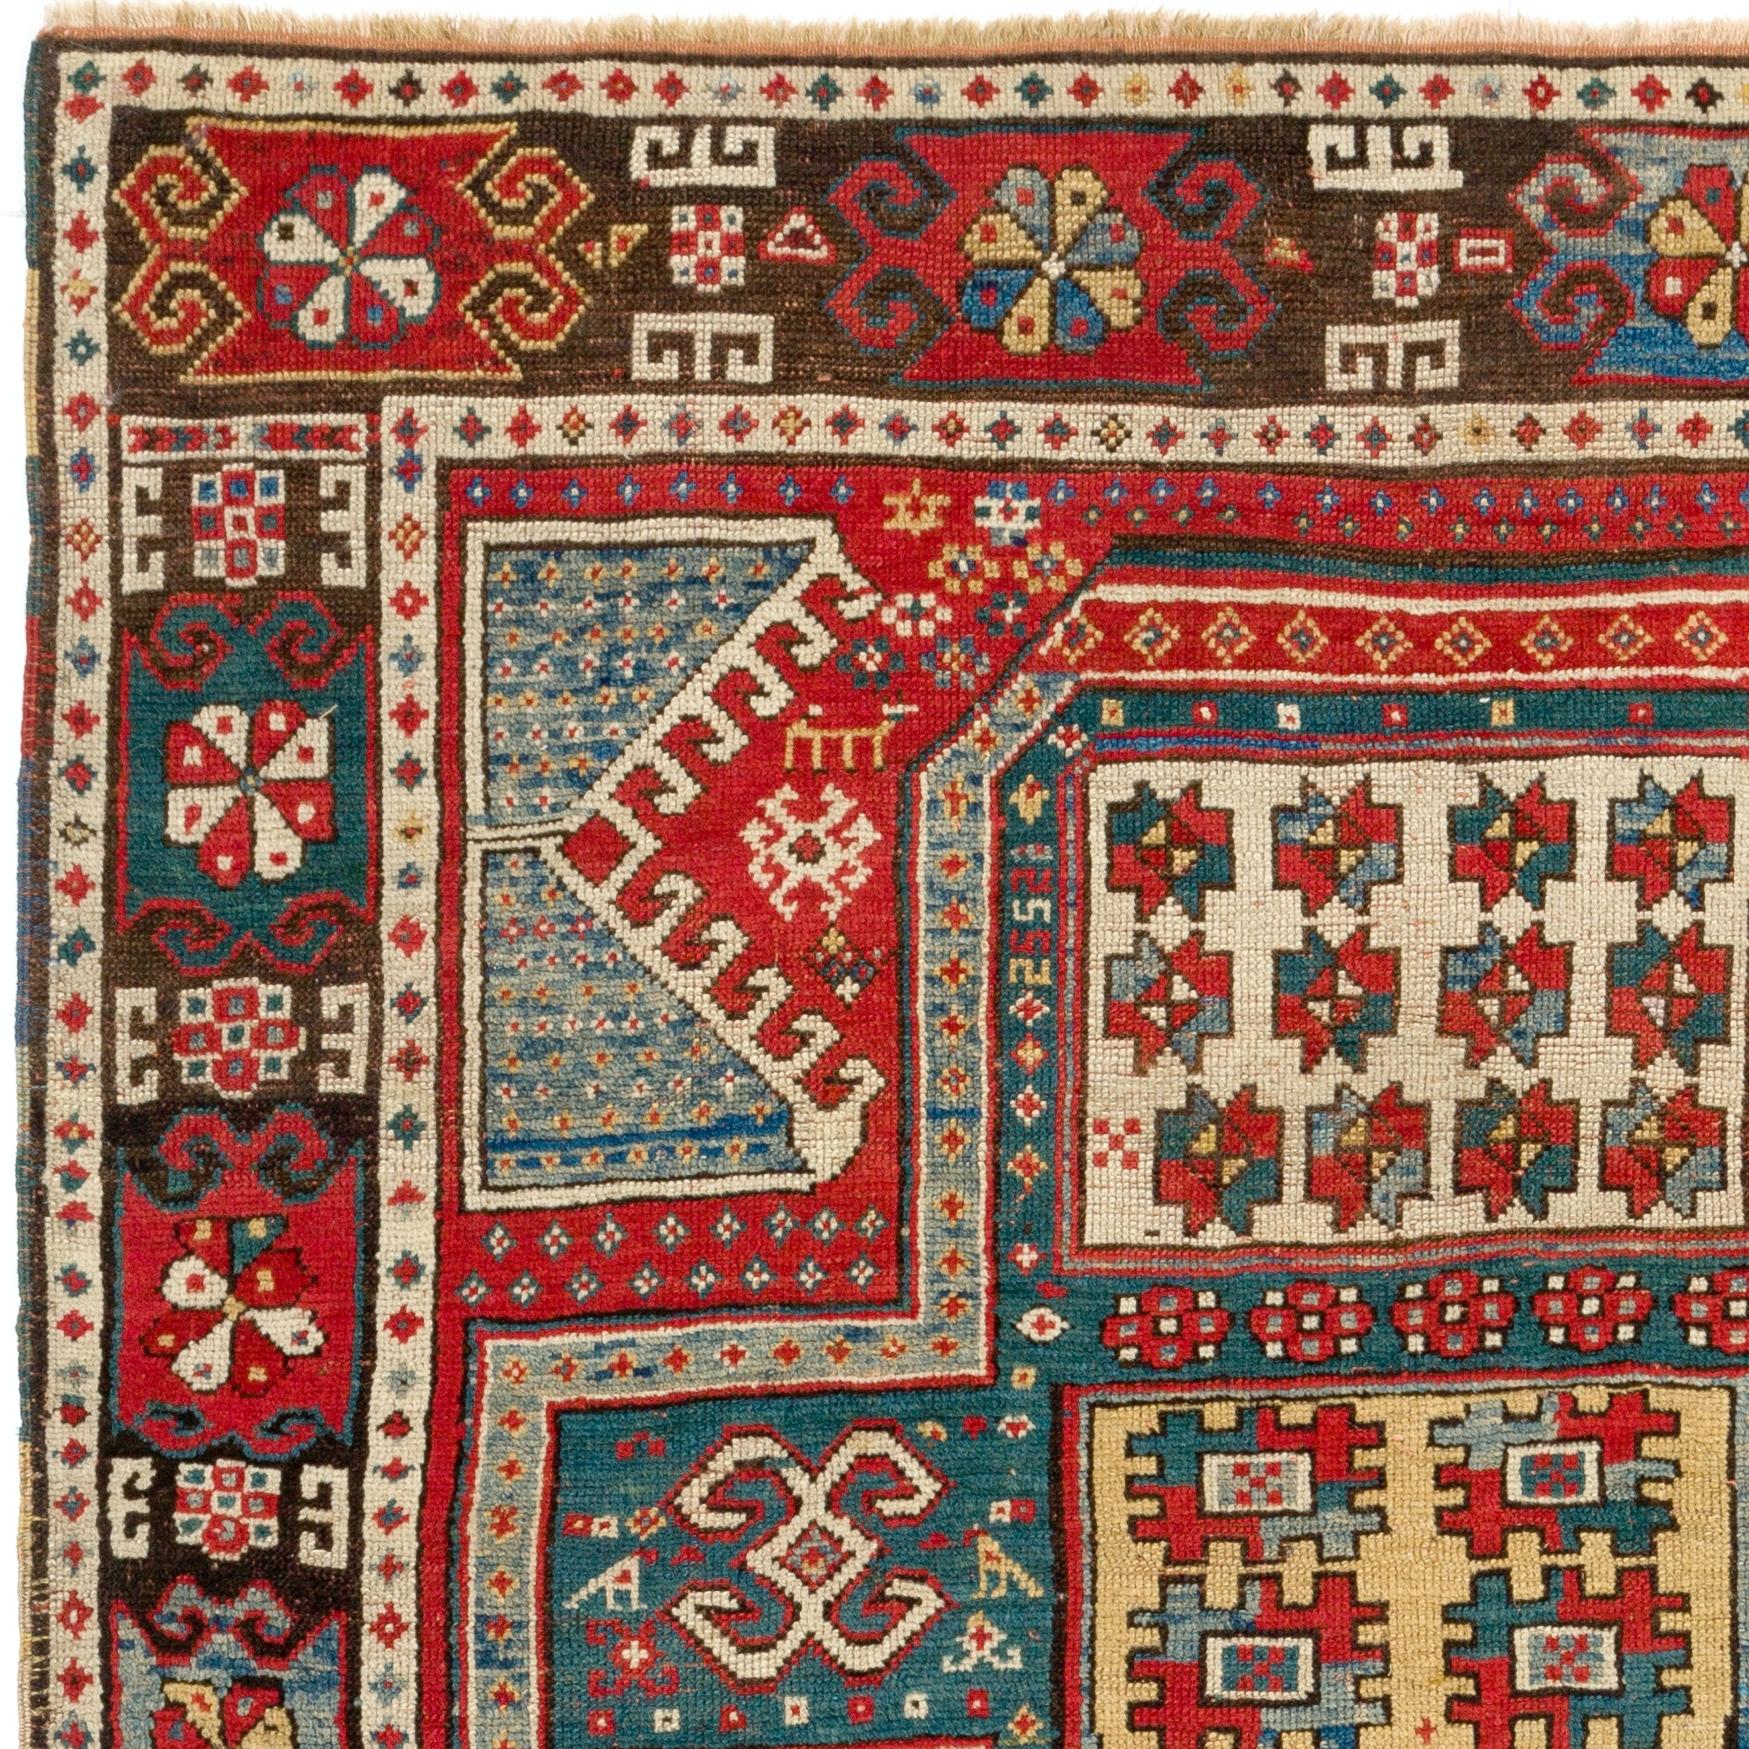 This fantastic work of textile art is from a very rare and small group of antique Kazak Rugs woven around Lake Sewan in Southern Caucasus. Dated 1860.
Fascinating natural dyed colors and a beautiful design, depicting a stylized shield pattern